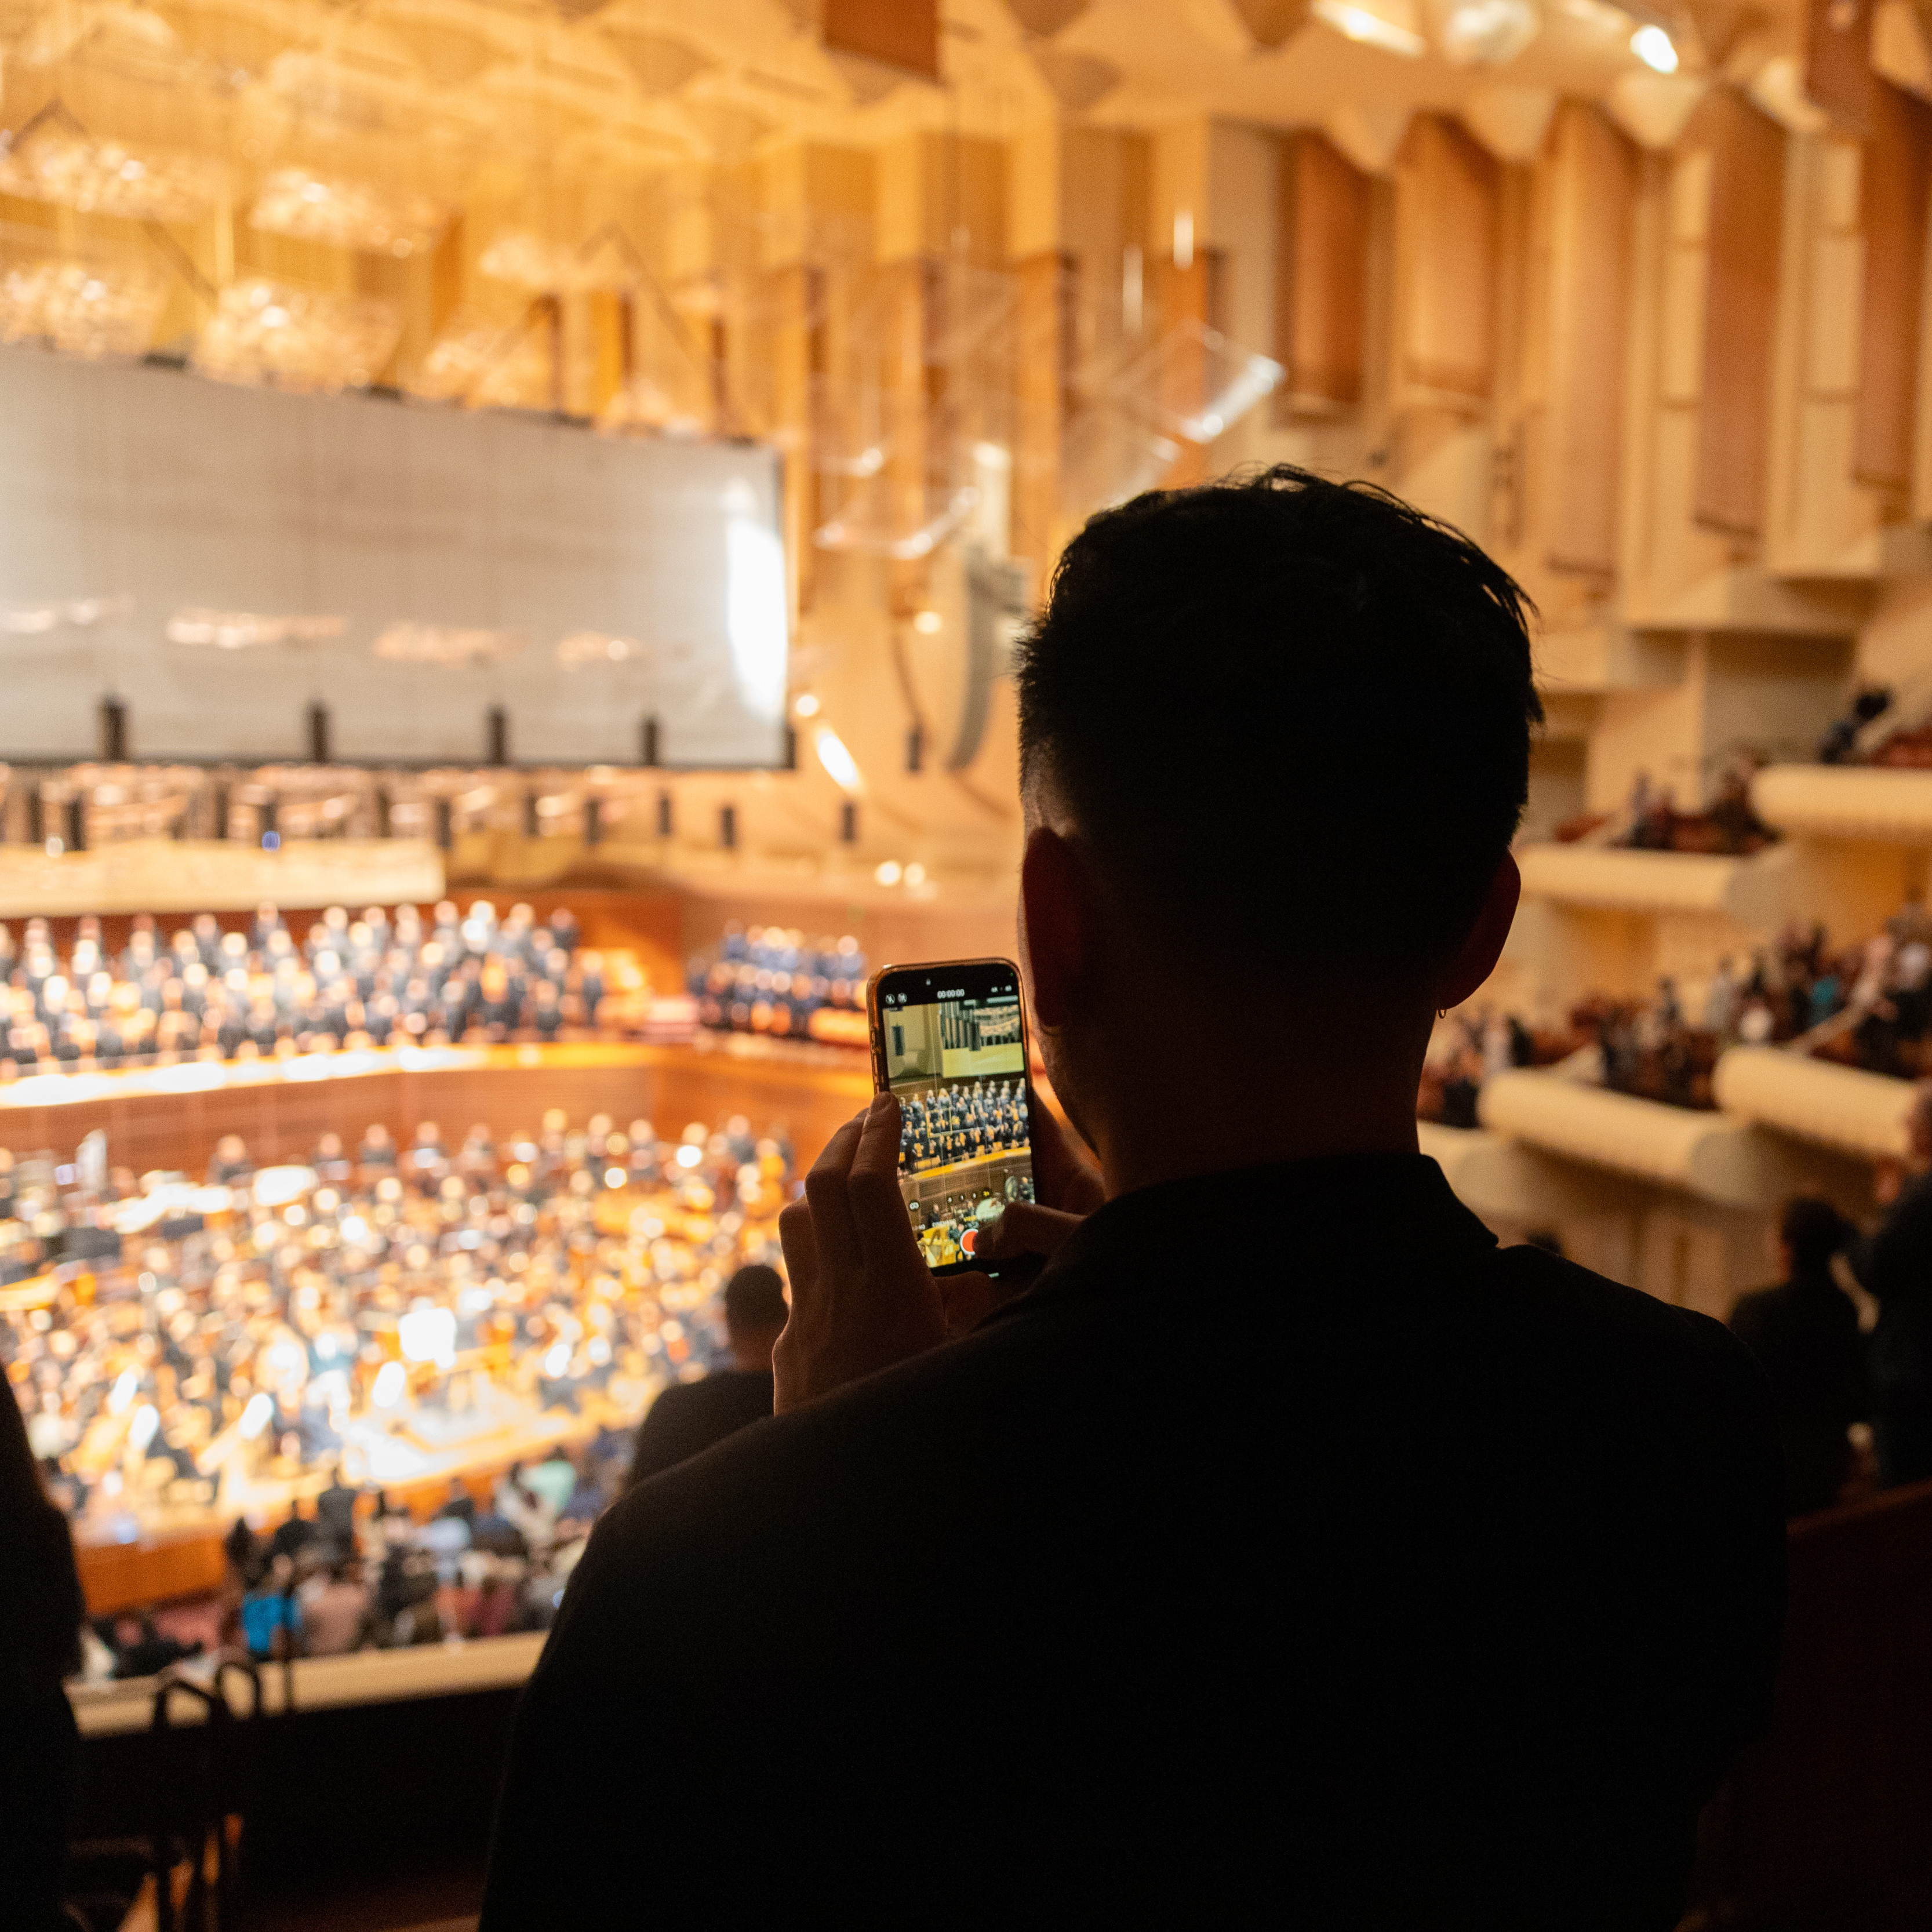 A person is taking a photo of an orchestra in a concert hall with their smartphone.